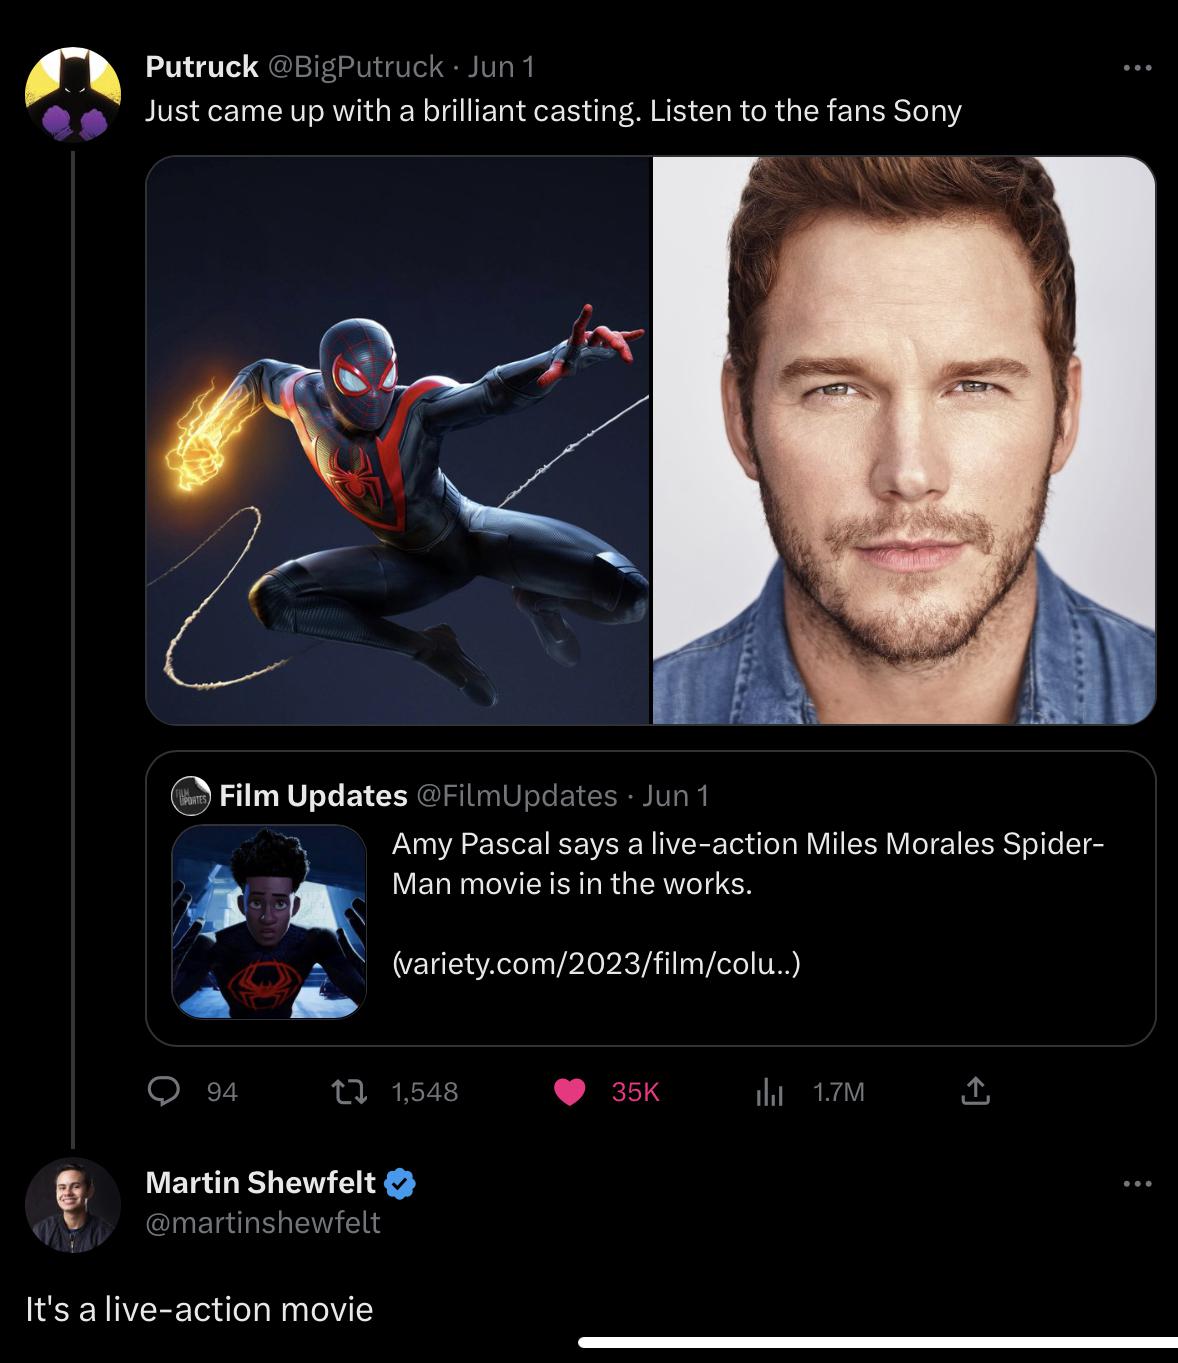 dumbs jokes - screenshot - Putruck . Jun 1 Just came up with a brilliant casting. Listen to the fans Sony Film Updates . Jun 1 94 Martin Shewfelt Amy Pascal says a liveaction Miles Morales Spider Man movie is in the works. 1 1,548 It's a liveaction movie 